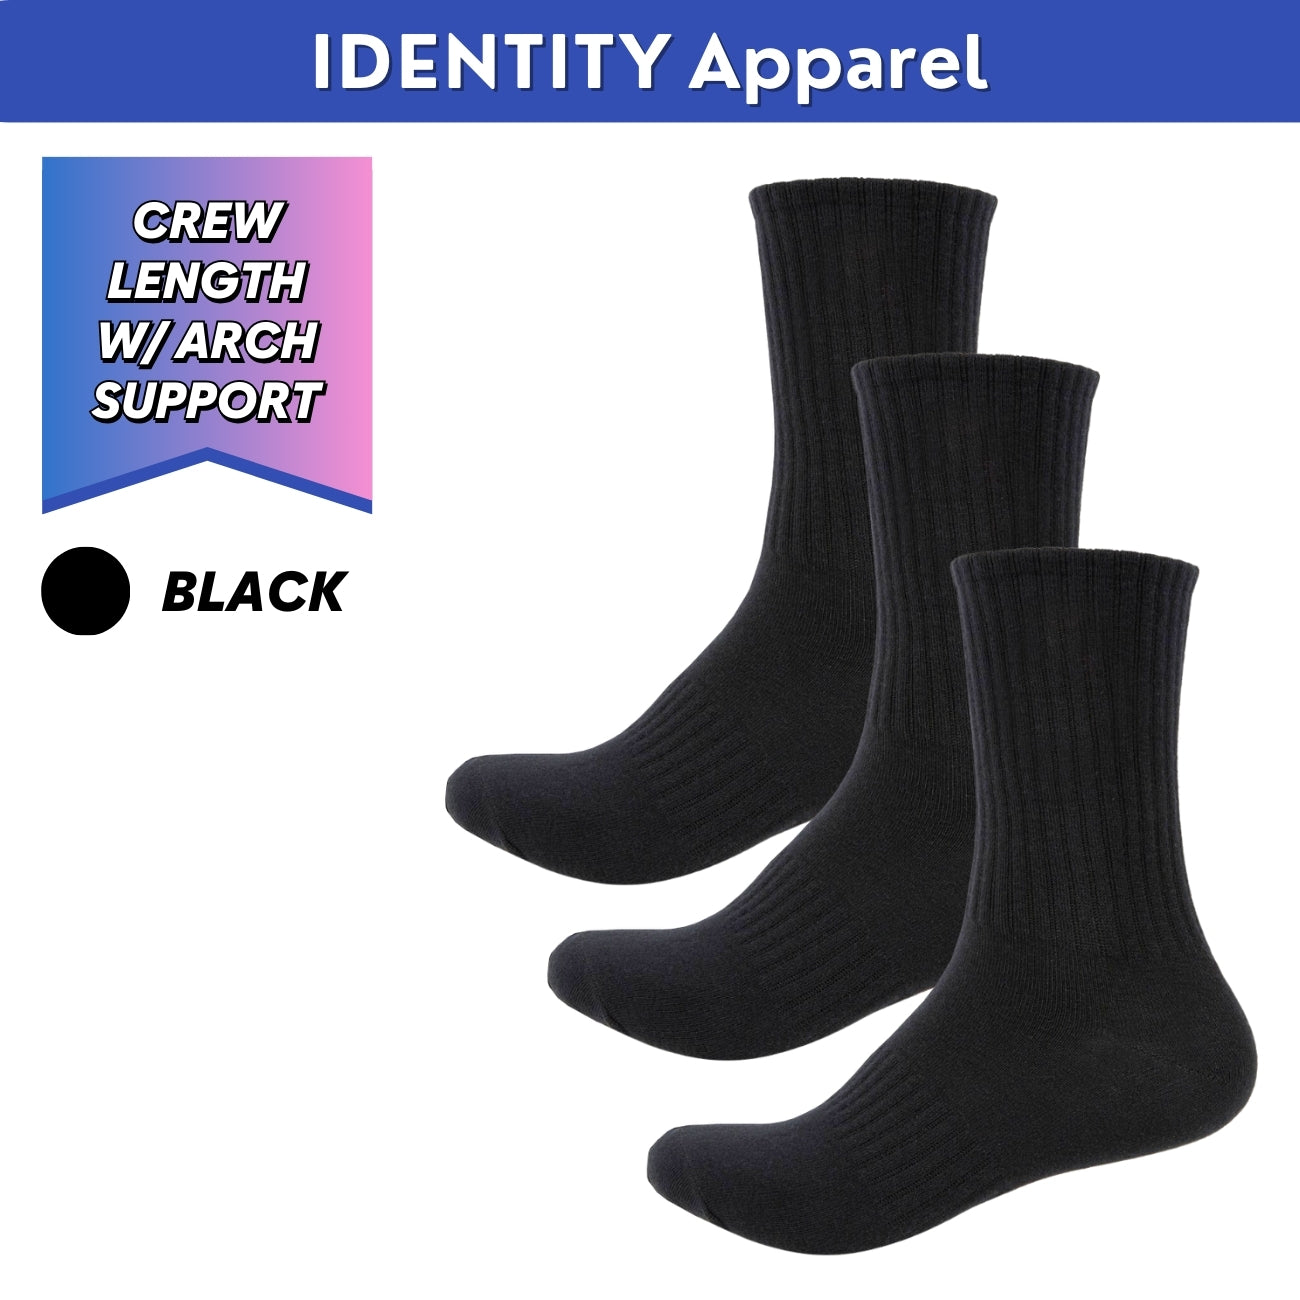 Mens Plain Stripe Basic Crew Length Cotton Socks with Arch Support